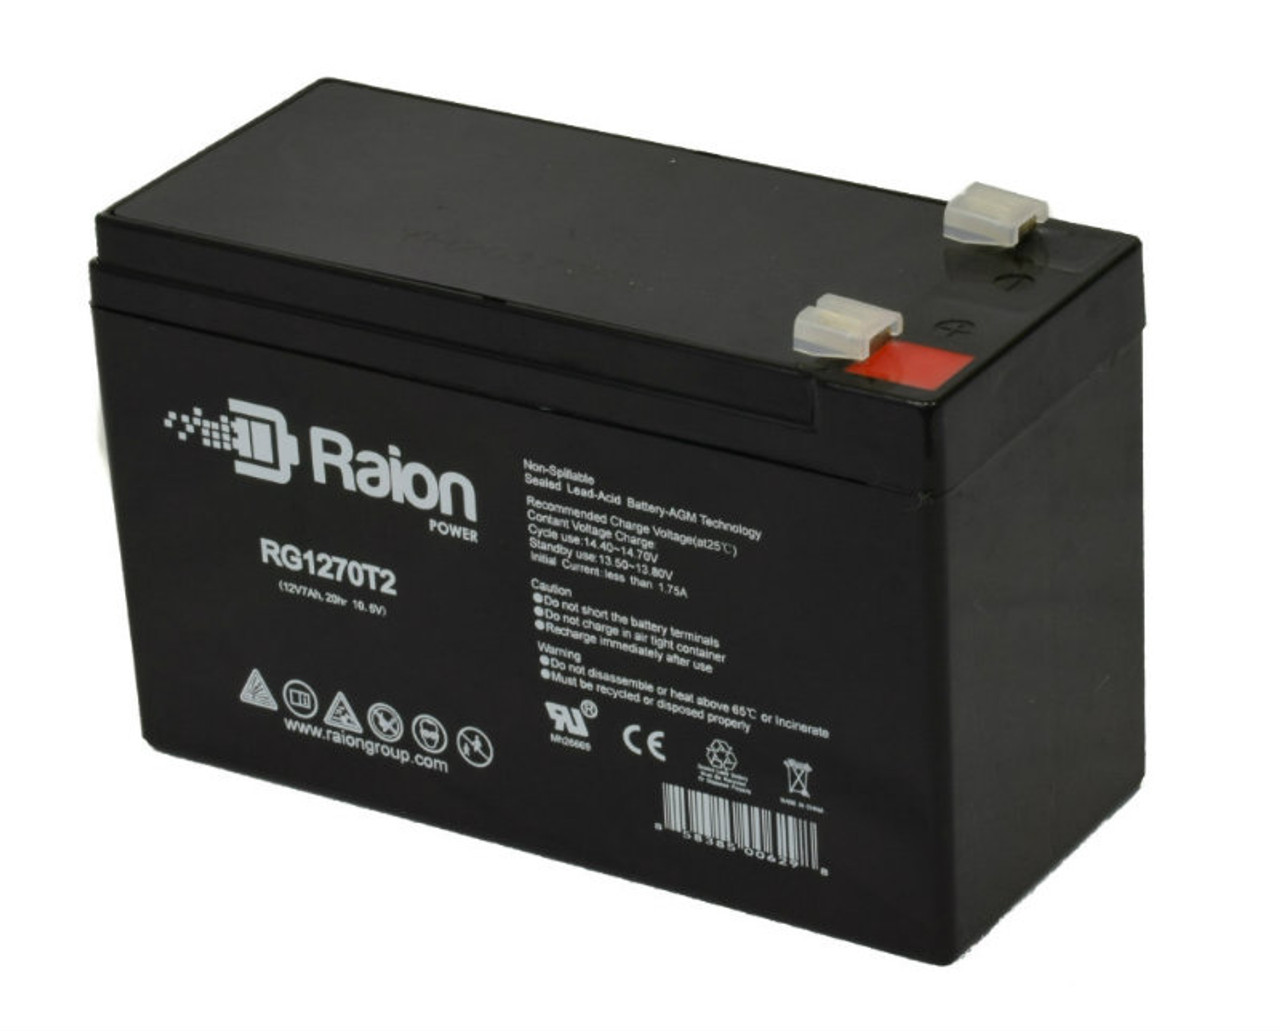 Raion Power RG1270T2 12V 7Ah Rechargeable Battery for FIAMM 12FGHL28